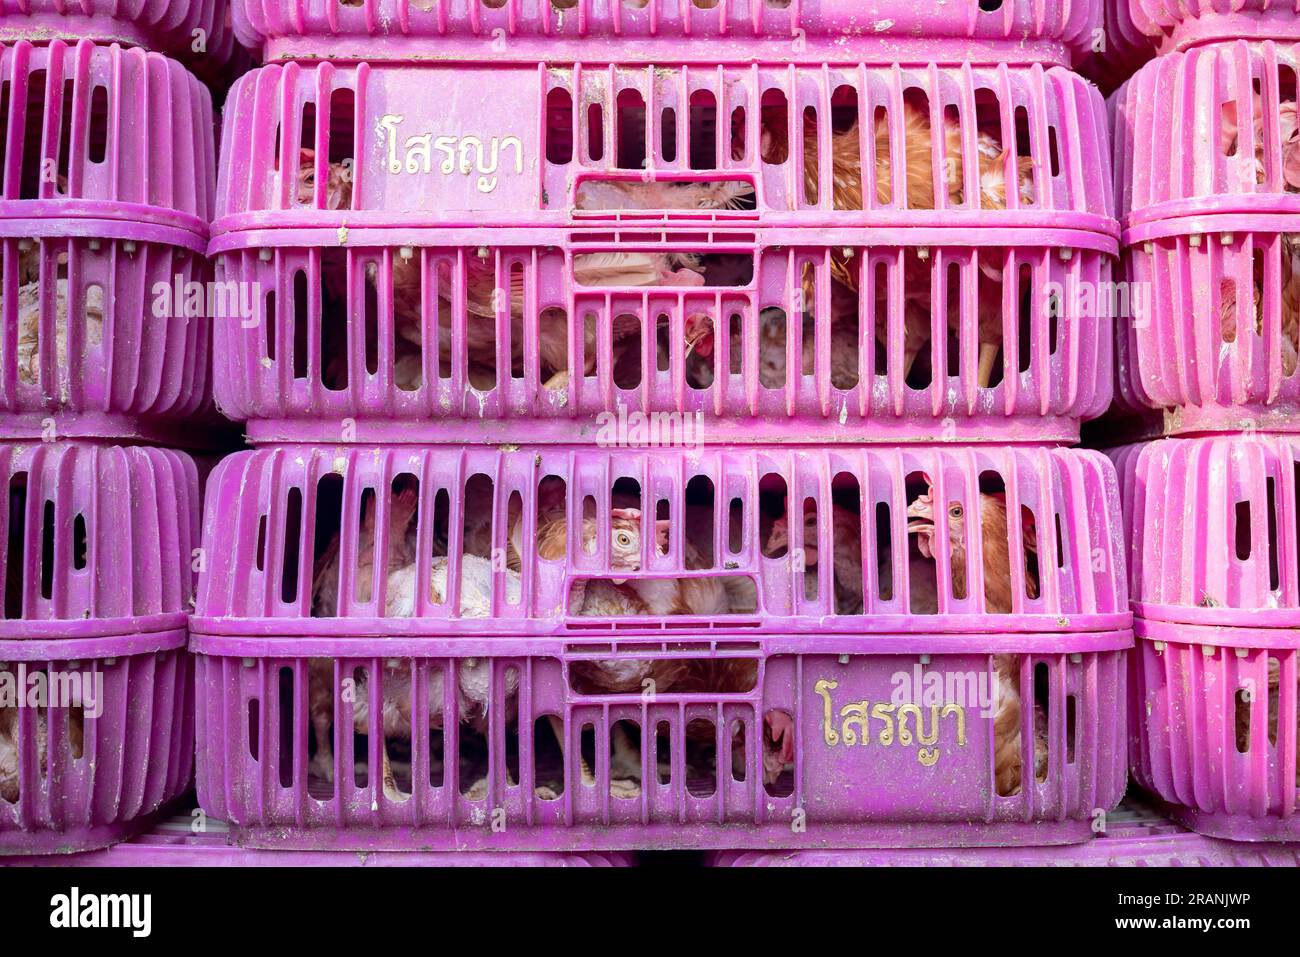 Live chickens are stacked in plastic crates at Khlong Toei Market in Bangkok Thailand, on February 22, 2023. Stock Photo